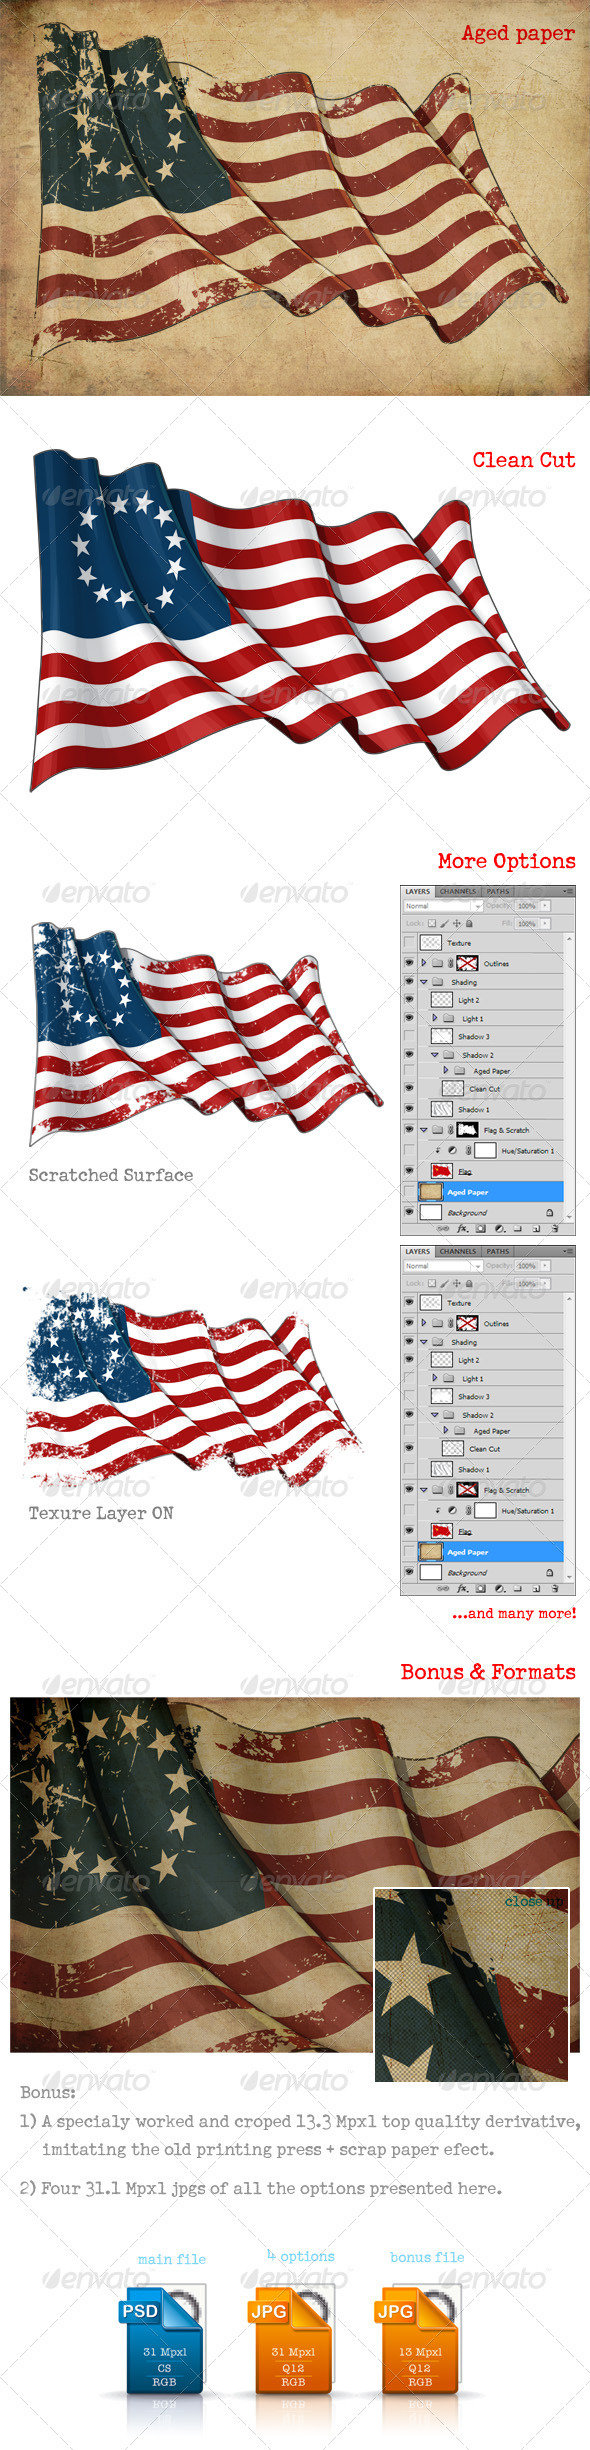 Betsy Ross Flag Meaning | lupon.gov.ph